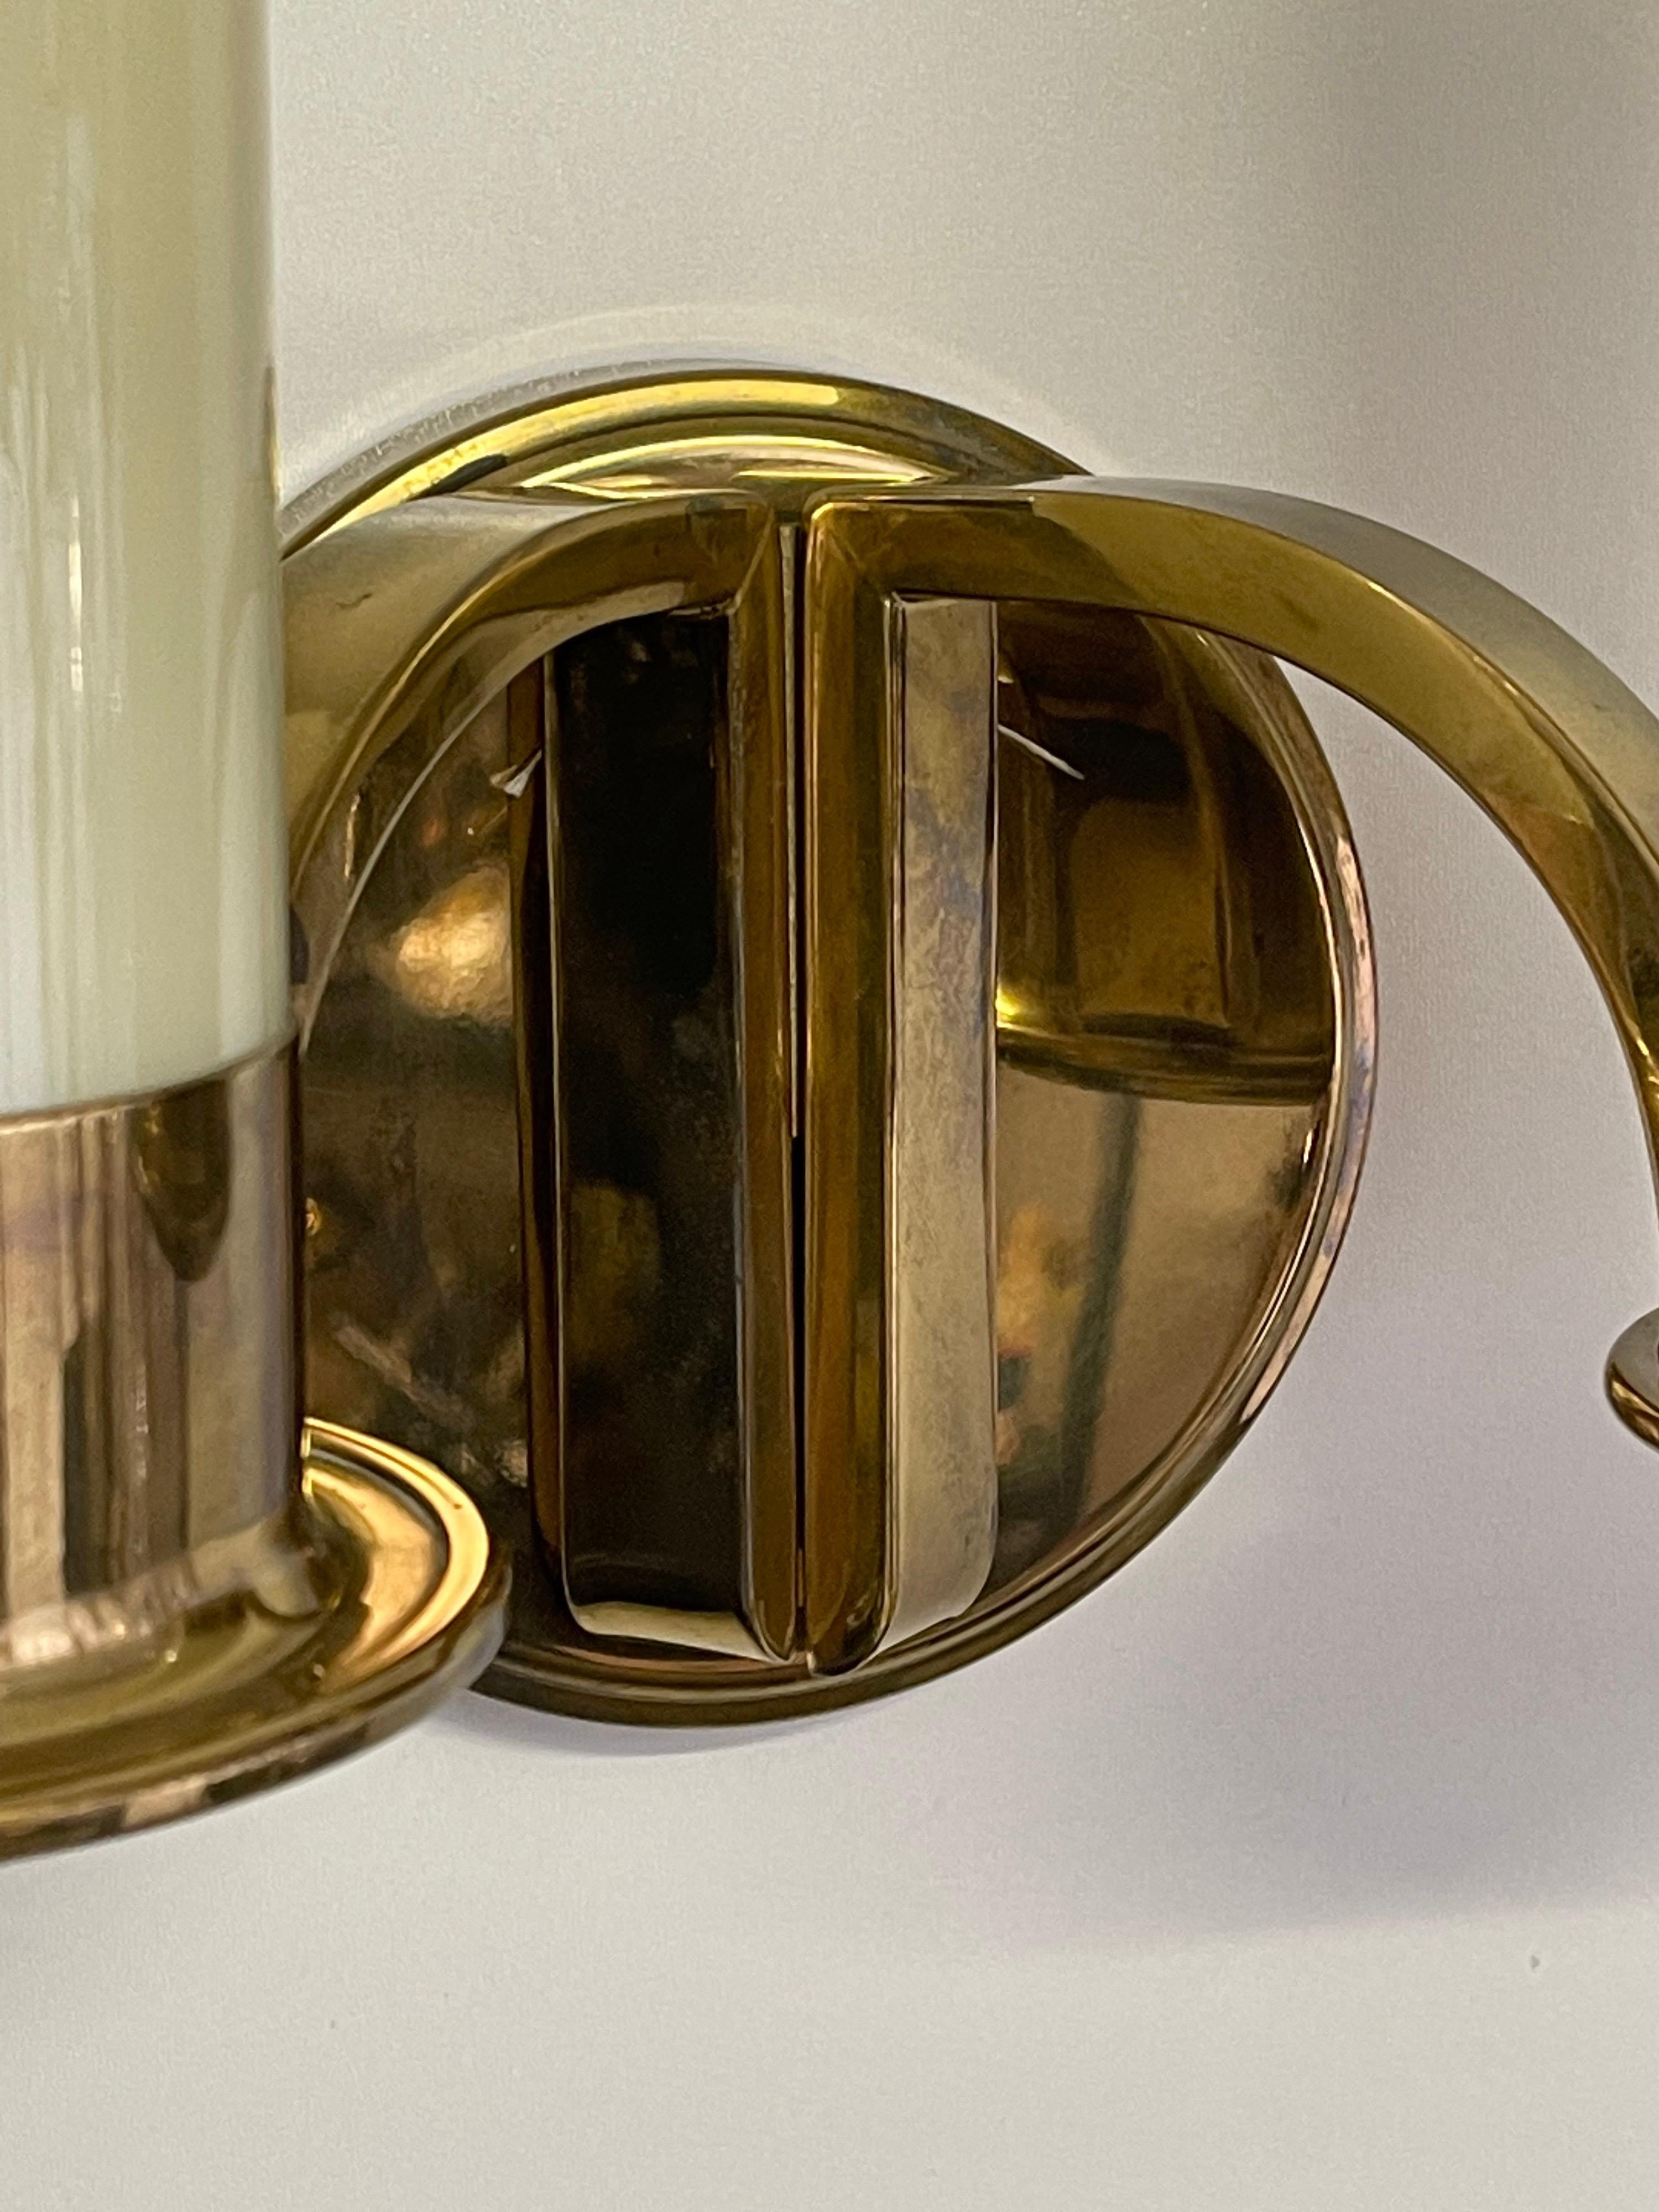 Set of Four Large Brass and Opal Glass Wall Sconces, circa 1930s For Sale 4